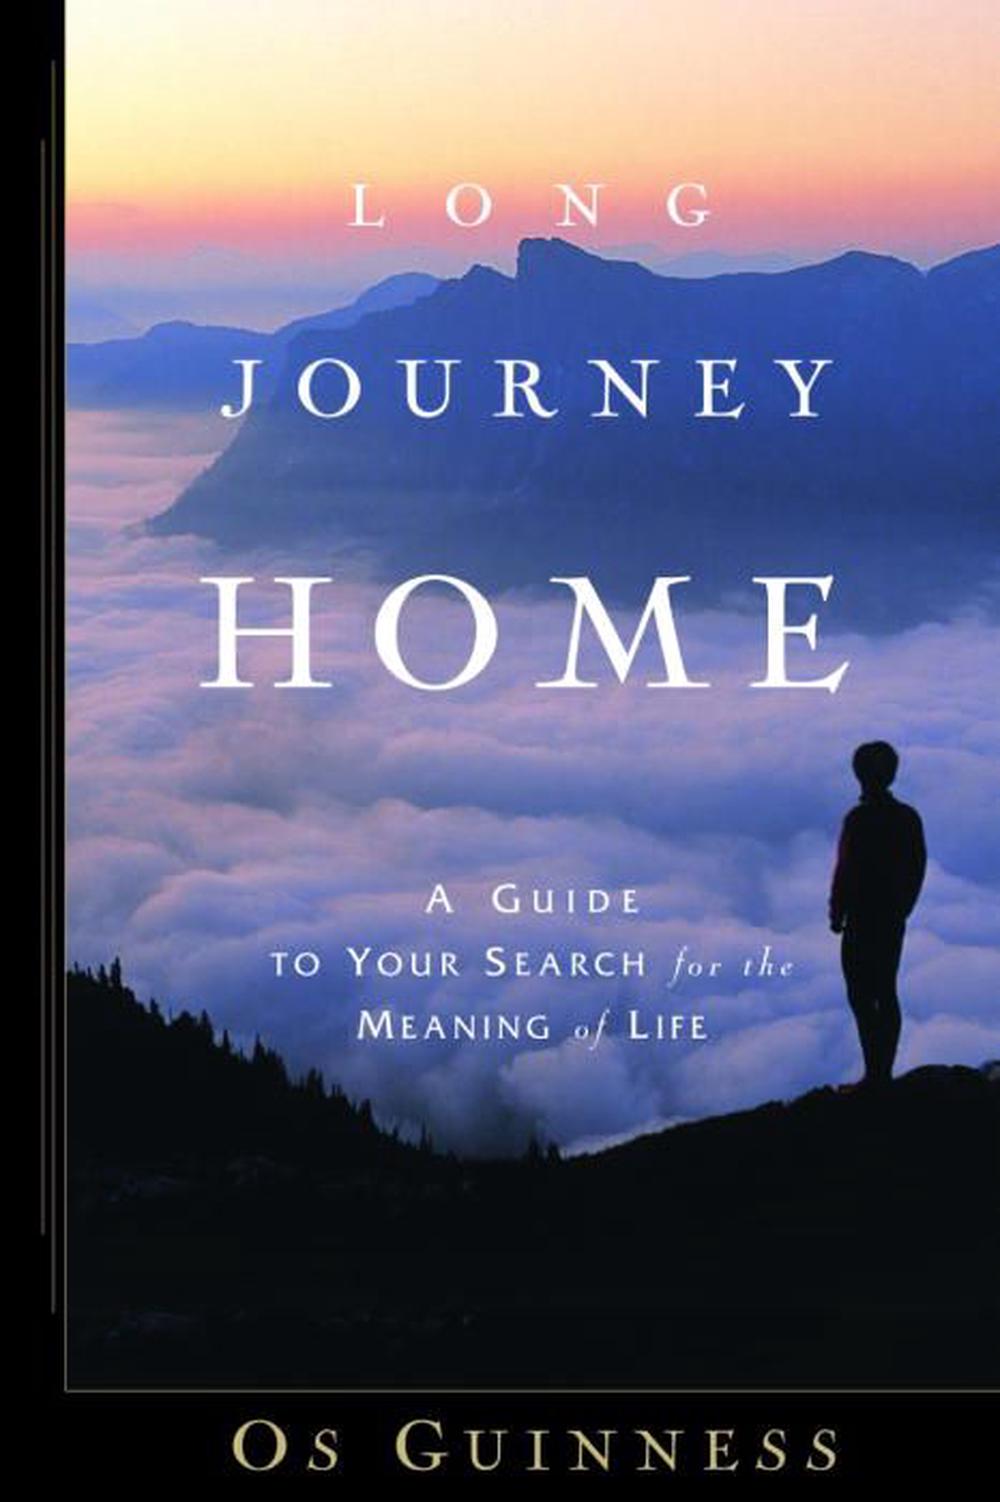 journey meaning